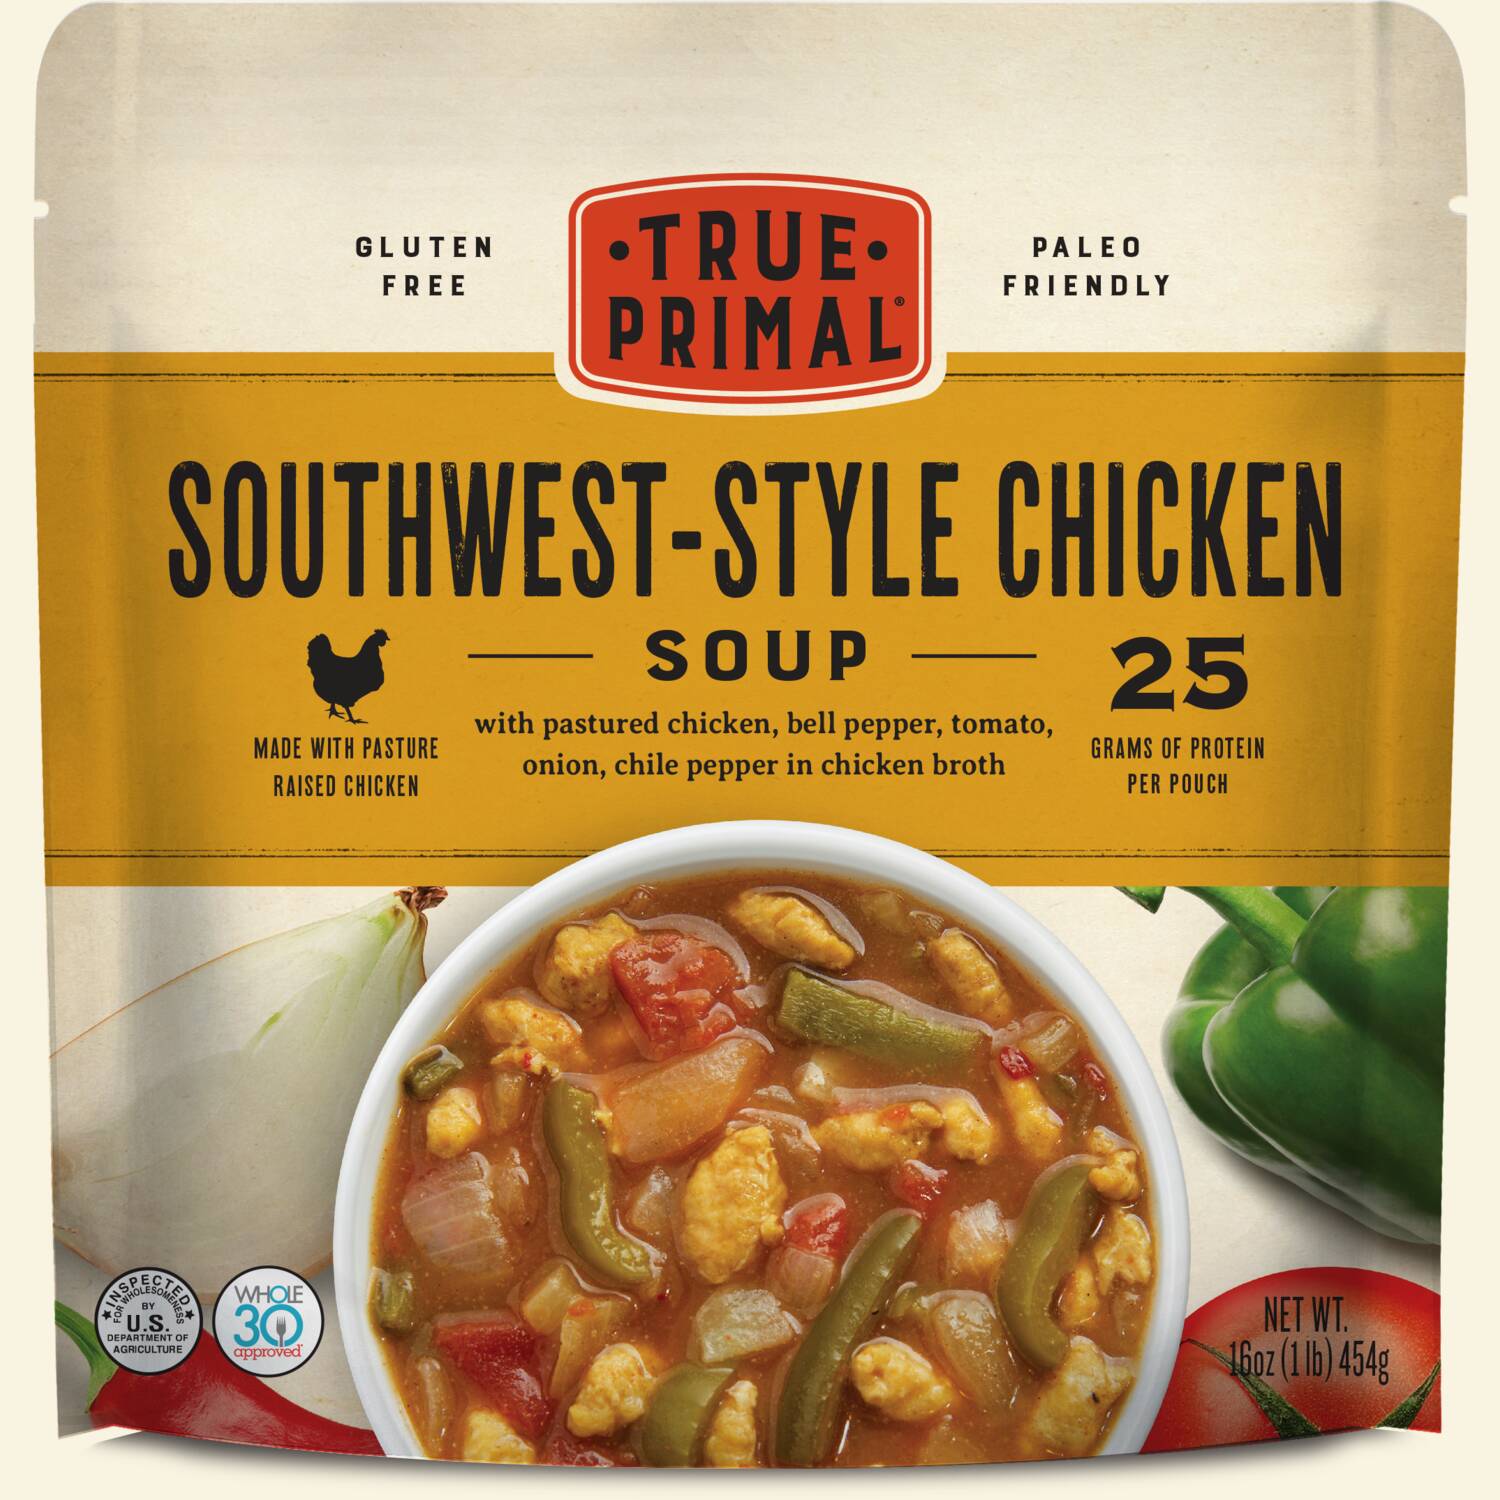 True Primal Southwest-Style Chicken Soup in pouch, front